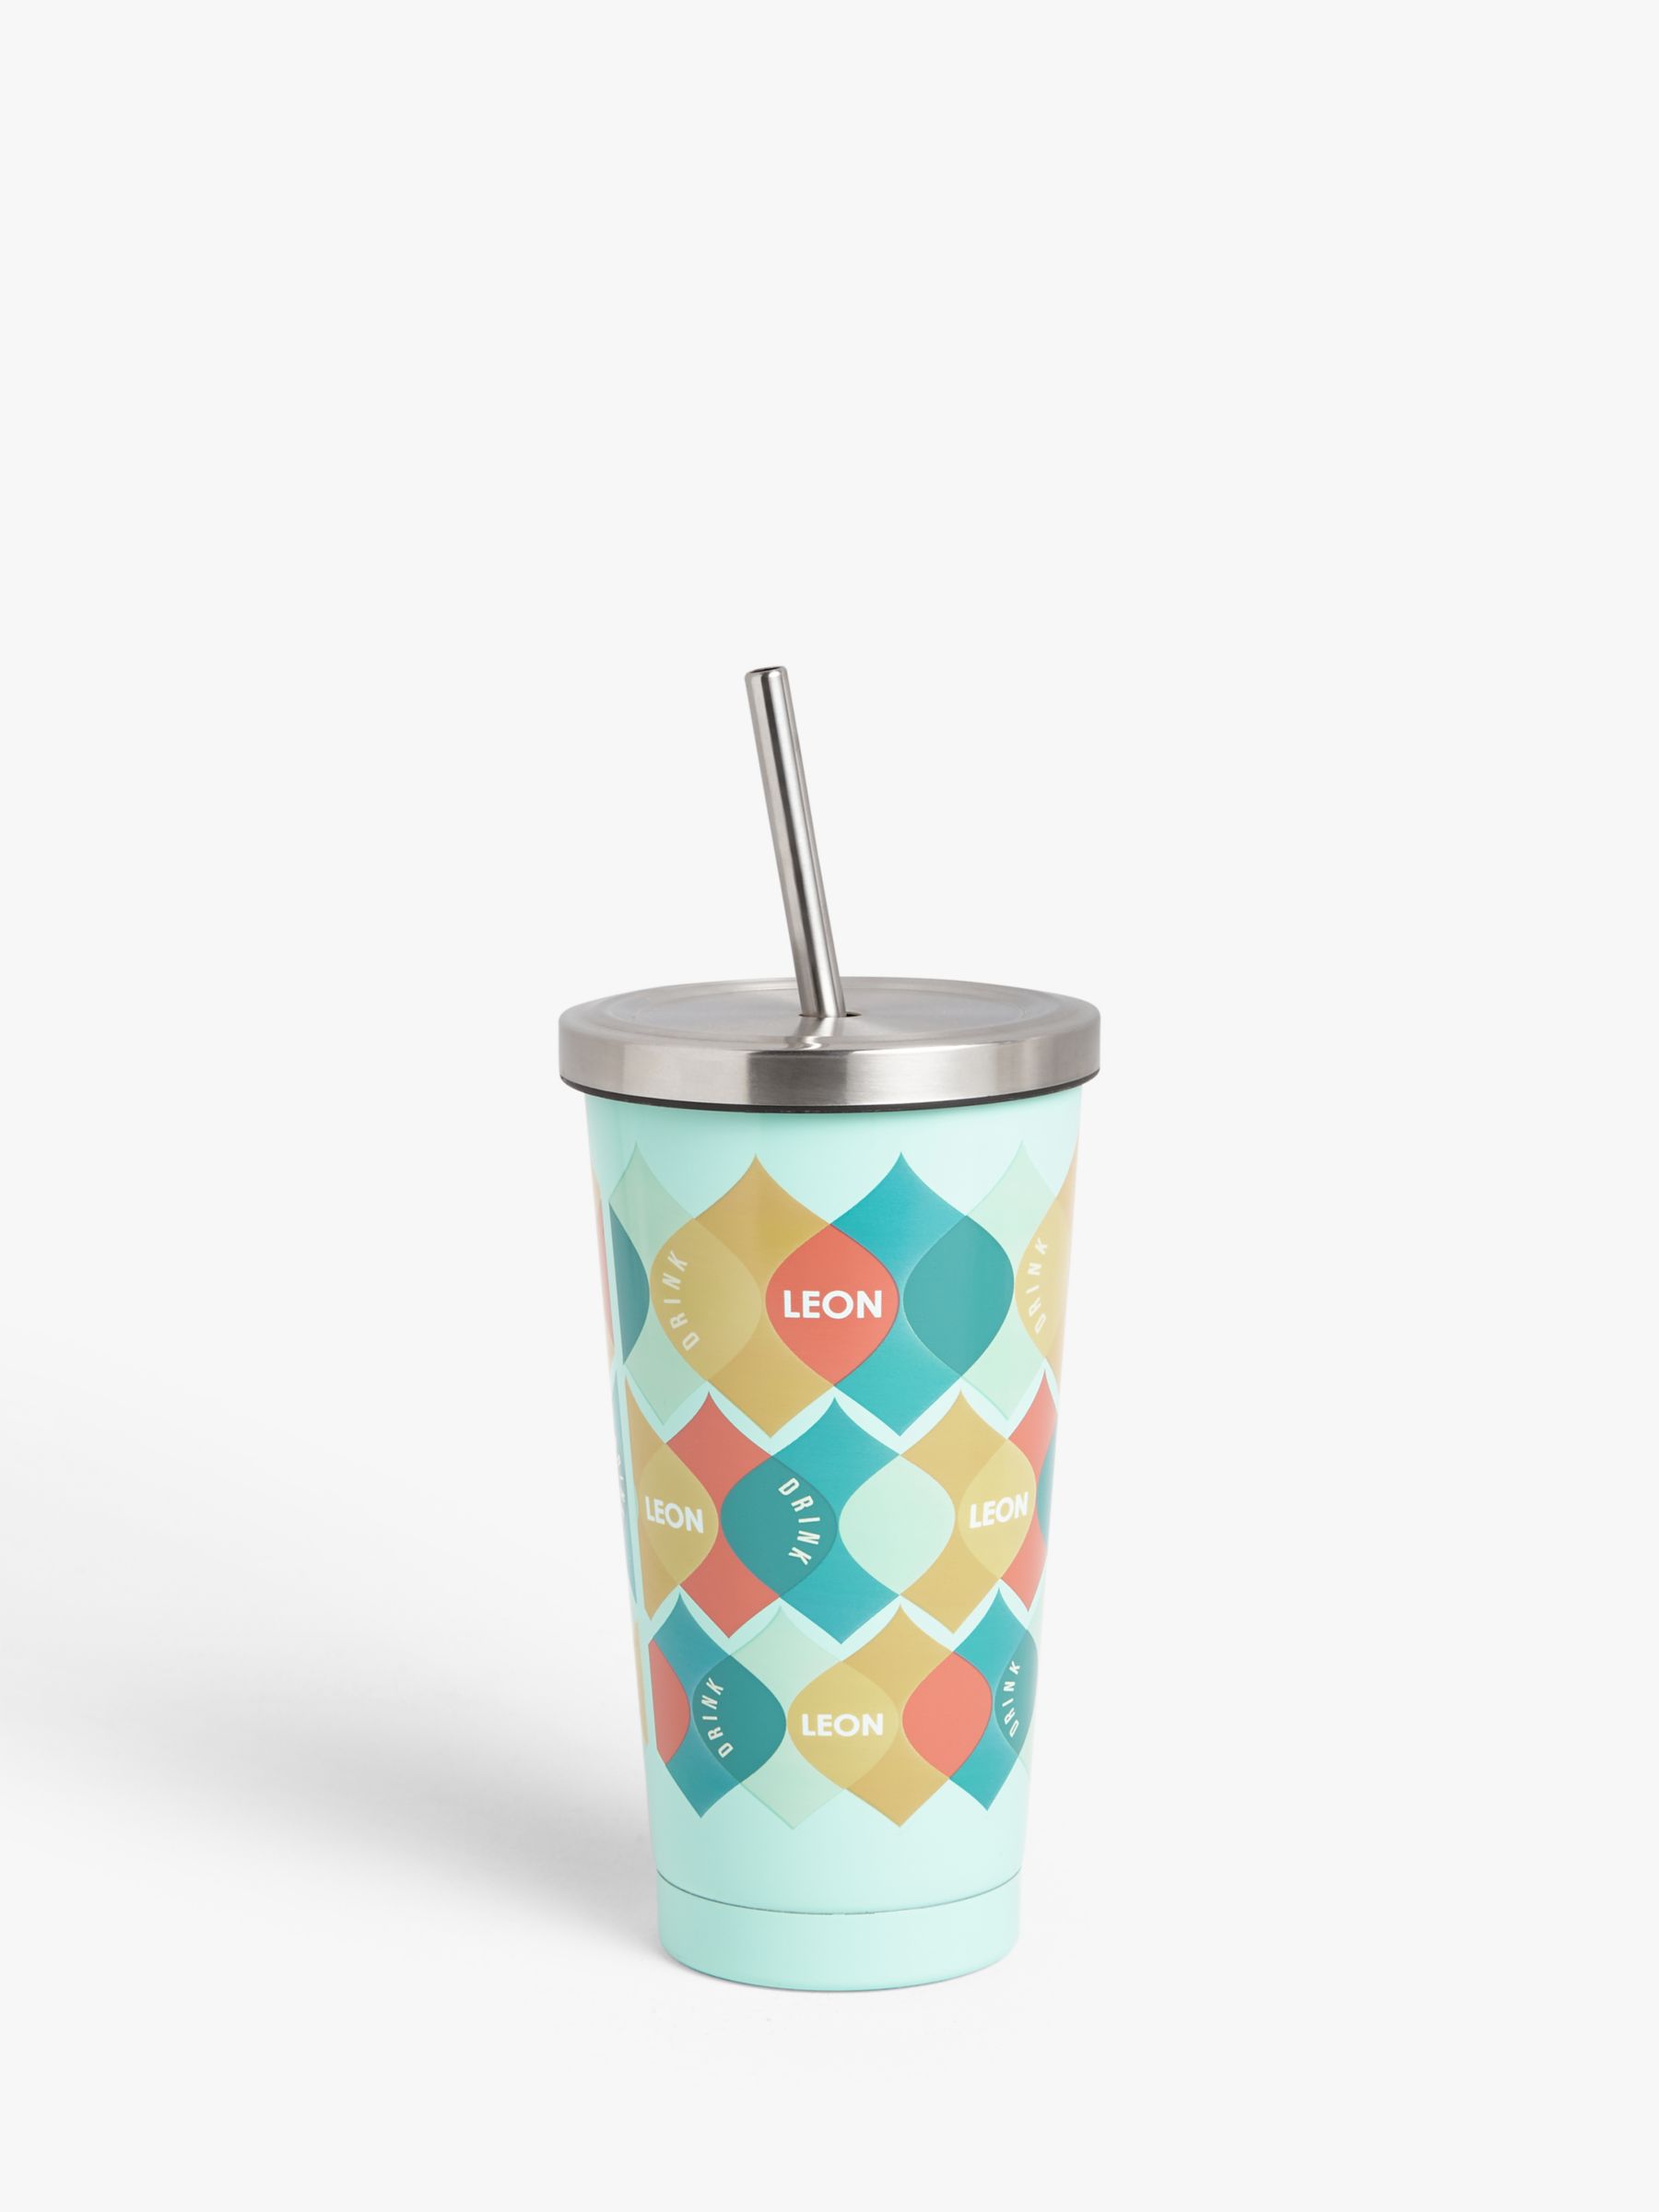 LEON Insulated Stainless Steel Smoothie Cup & Straw, 480ml, Multi